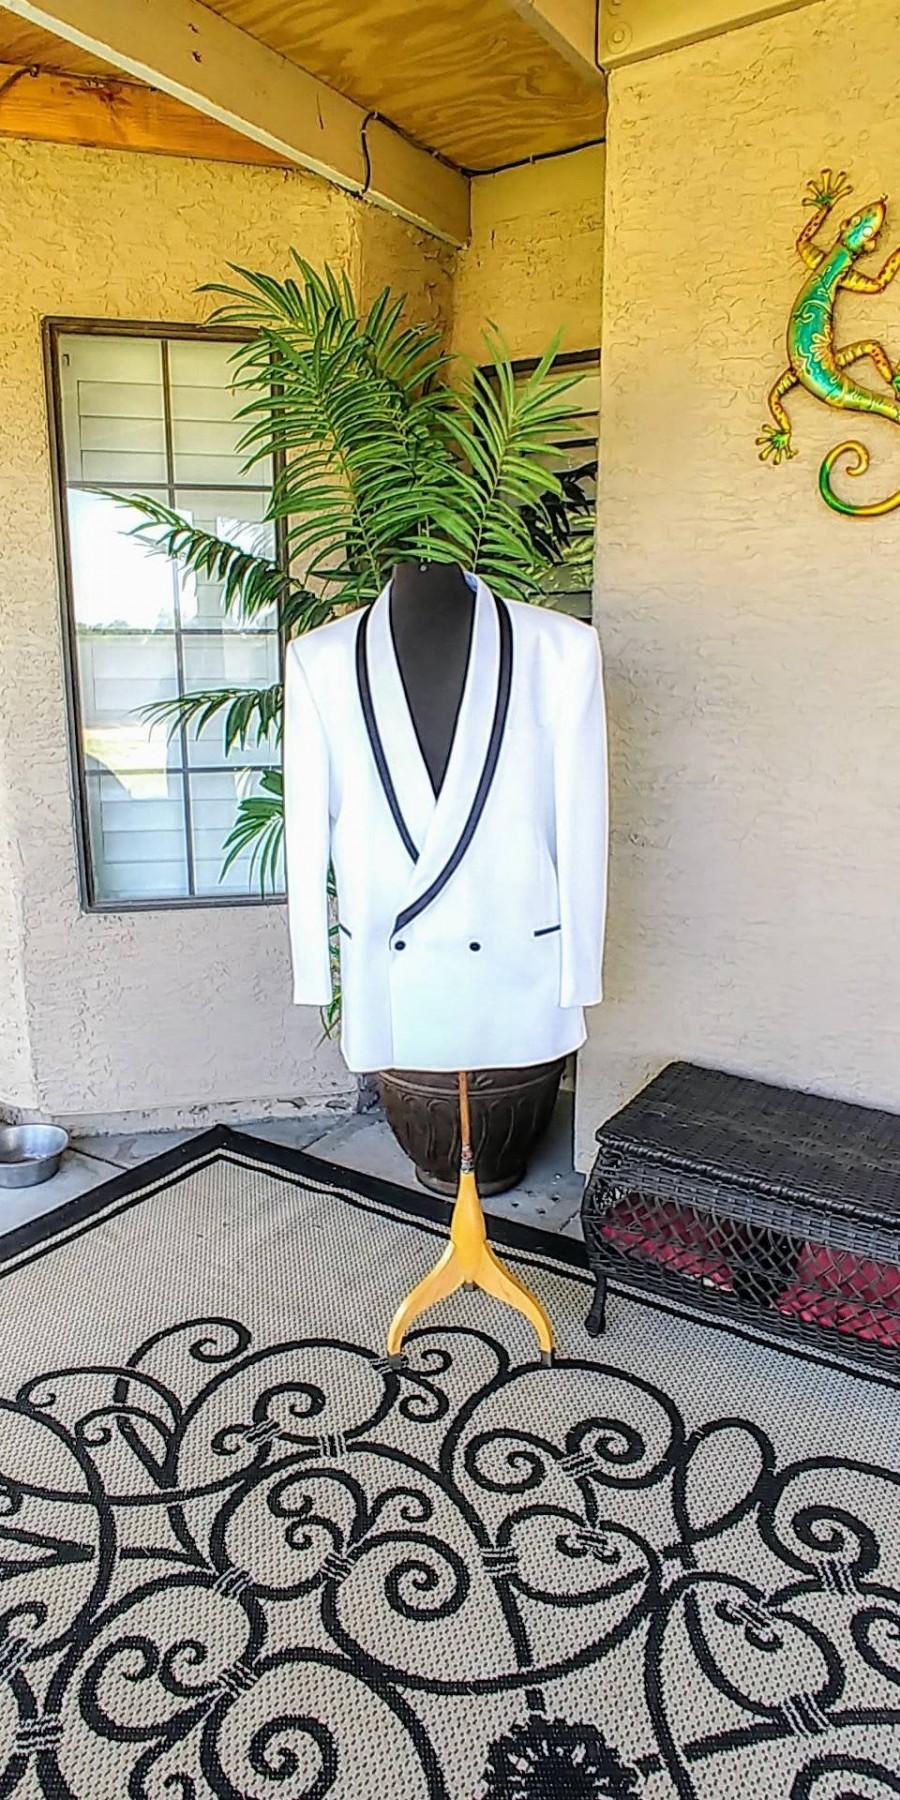 Hochzeit - Men's White Vintage Tuxedo Jacket. The Formal Wear Collection by Raffinati Made in U.S.A. Beautiful Jacket White with Black Trim. Size 50 L